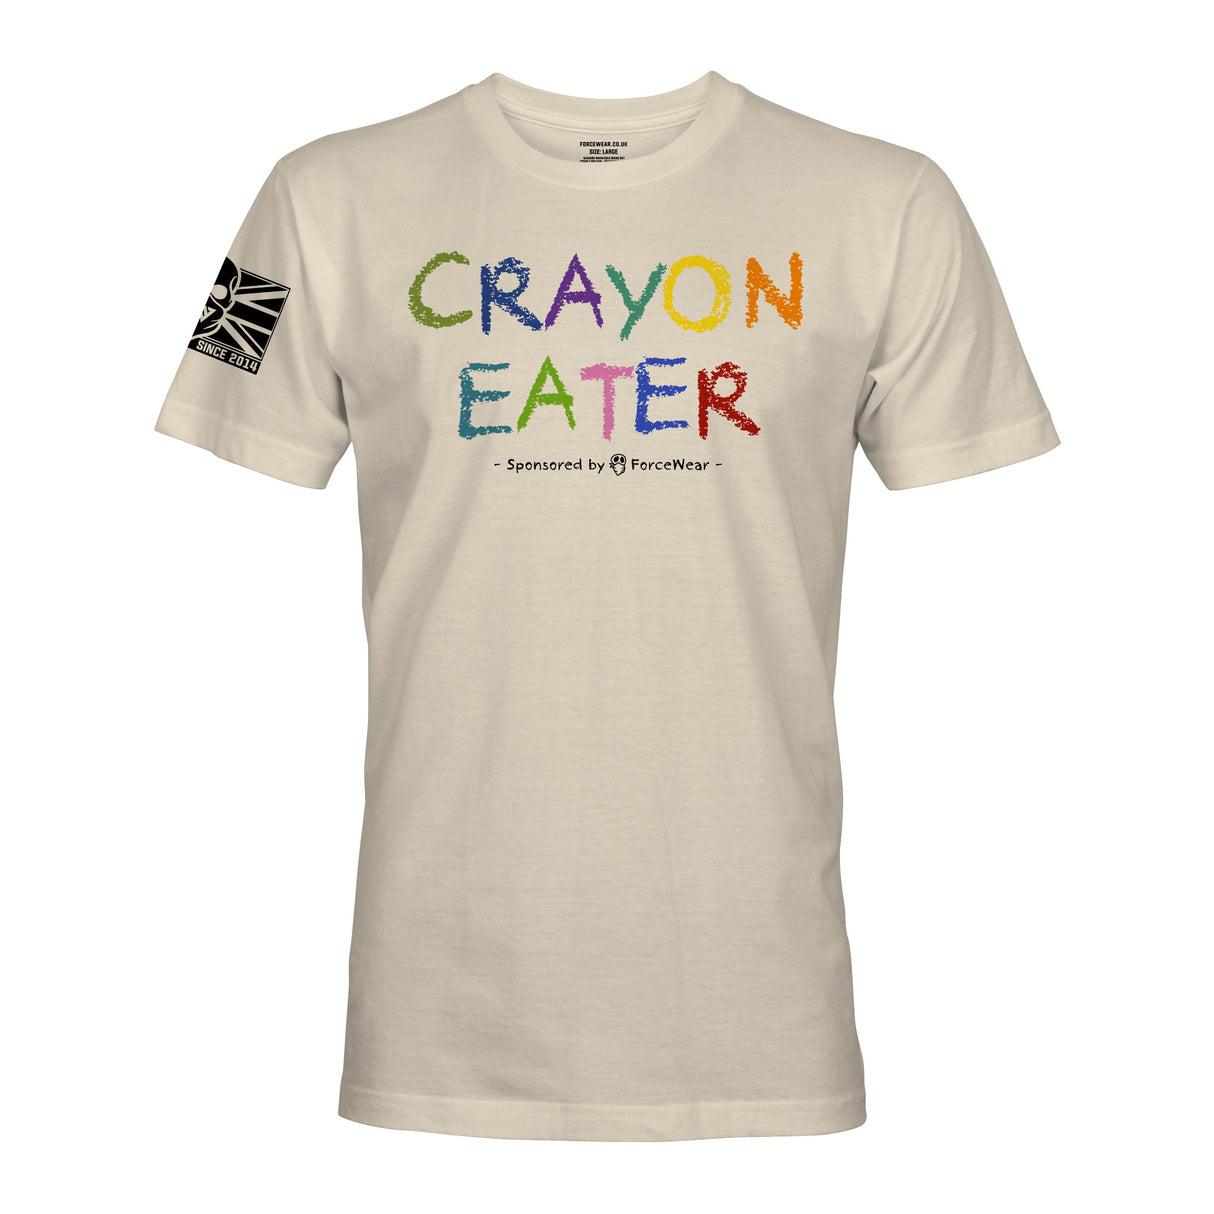 CRAYON EATER - Force Wear HQ - T-SHIRTS